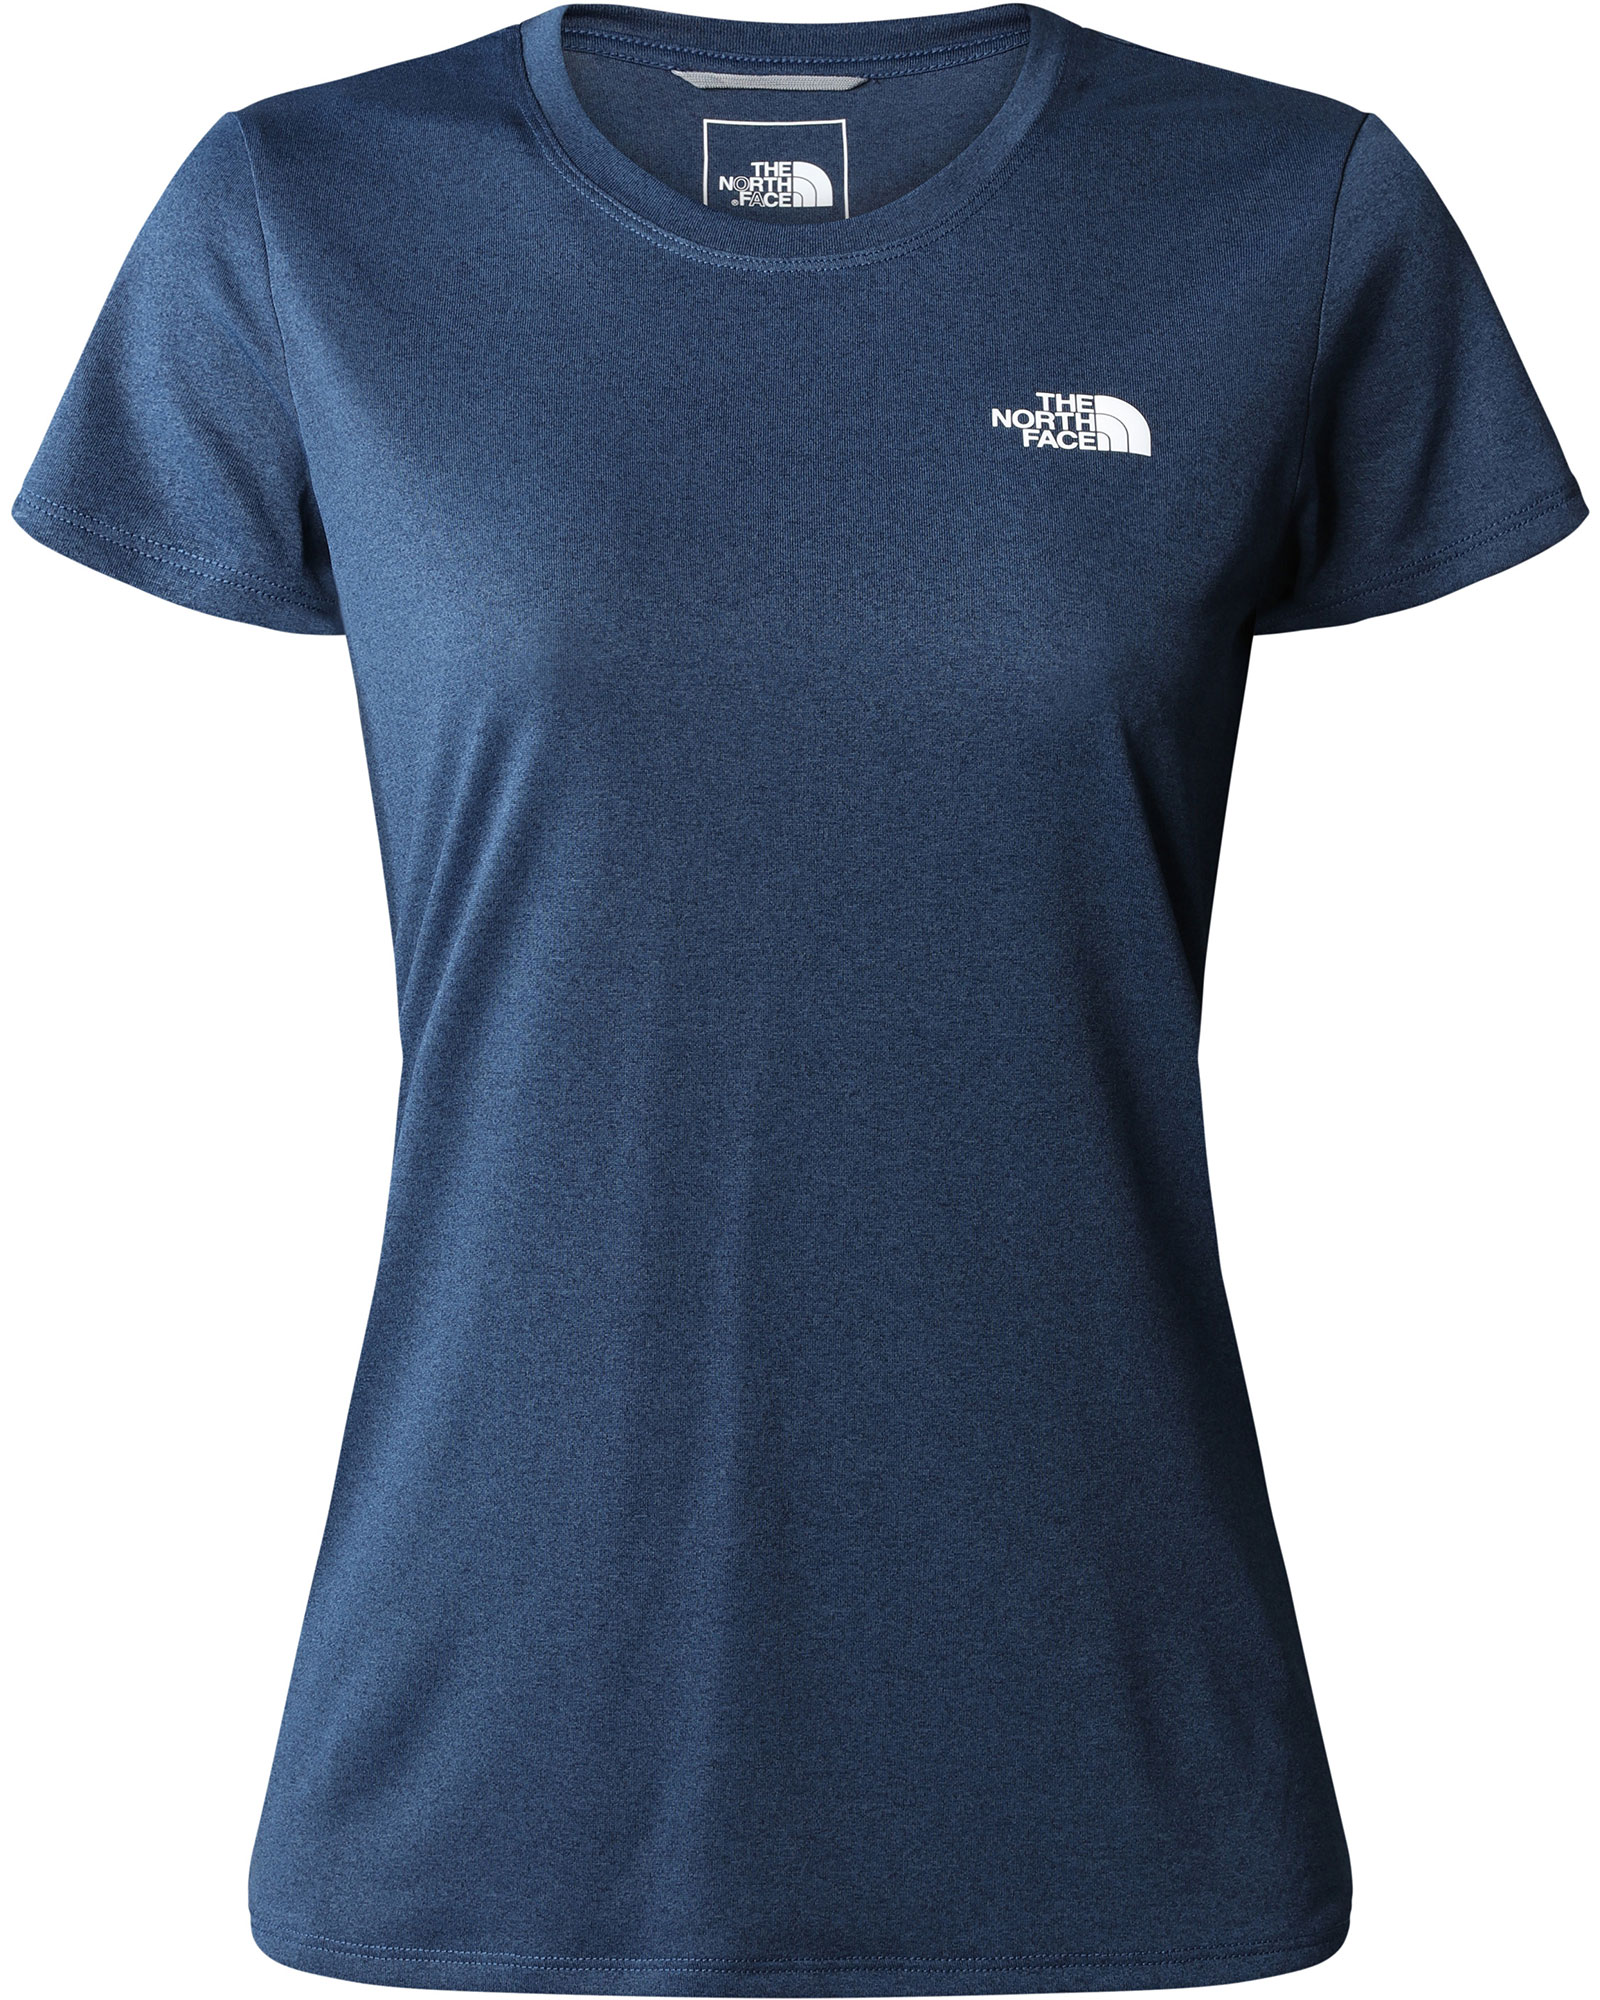 The North Face Reaxion Amp Women’s Crew T Shirt - Shady Blue Heather XL